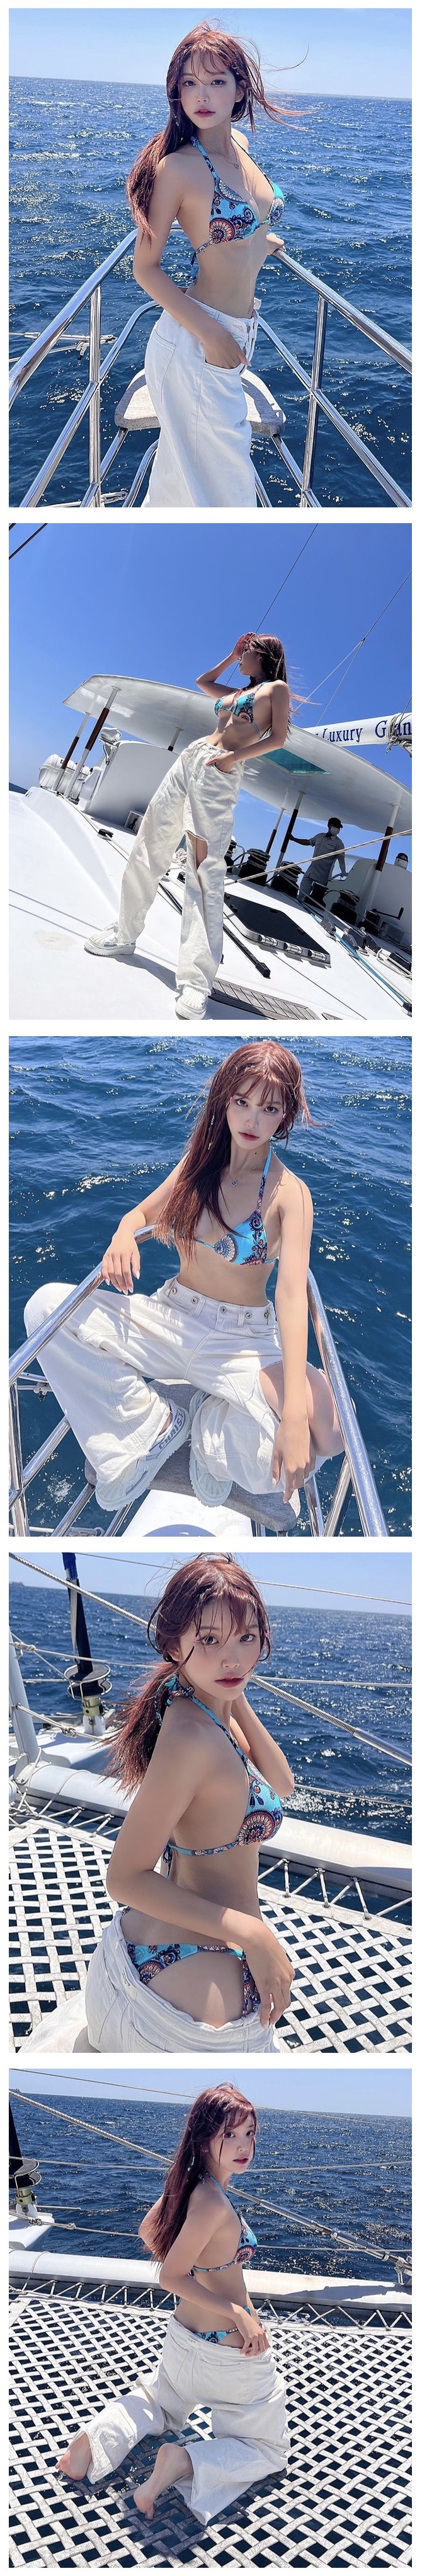 A girl I want to go on a yacht with